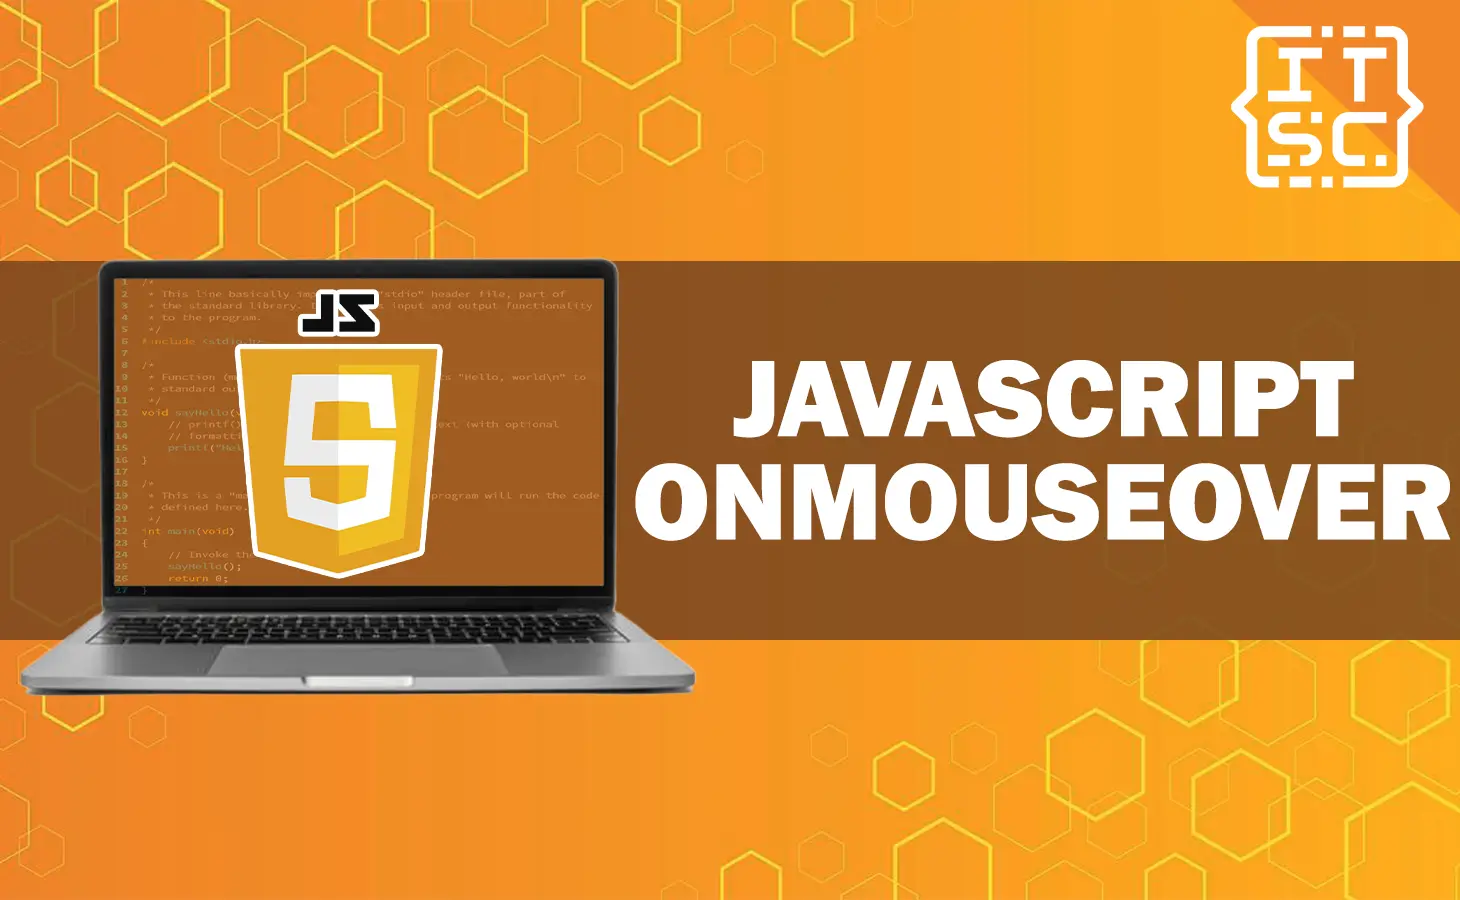 JavaScript onMouseover